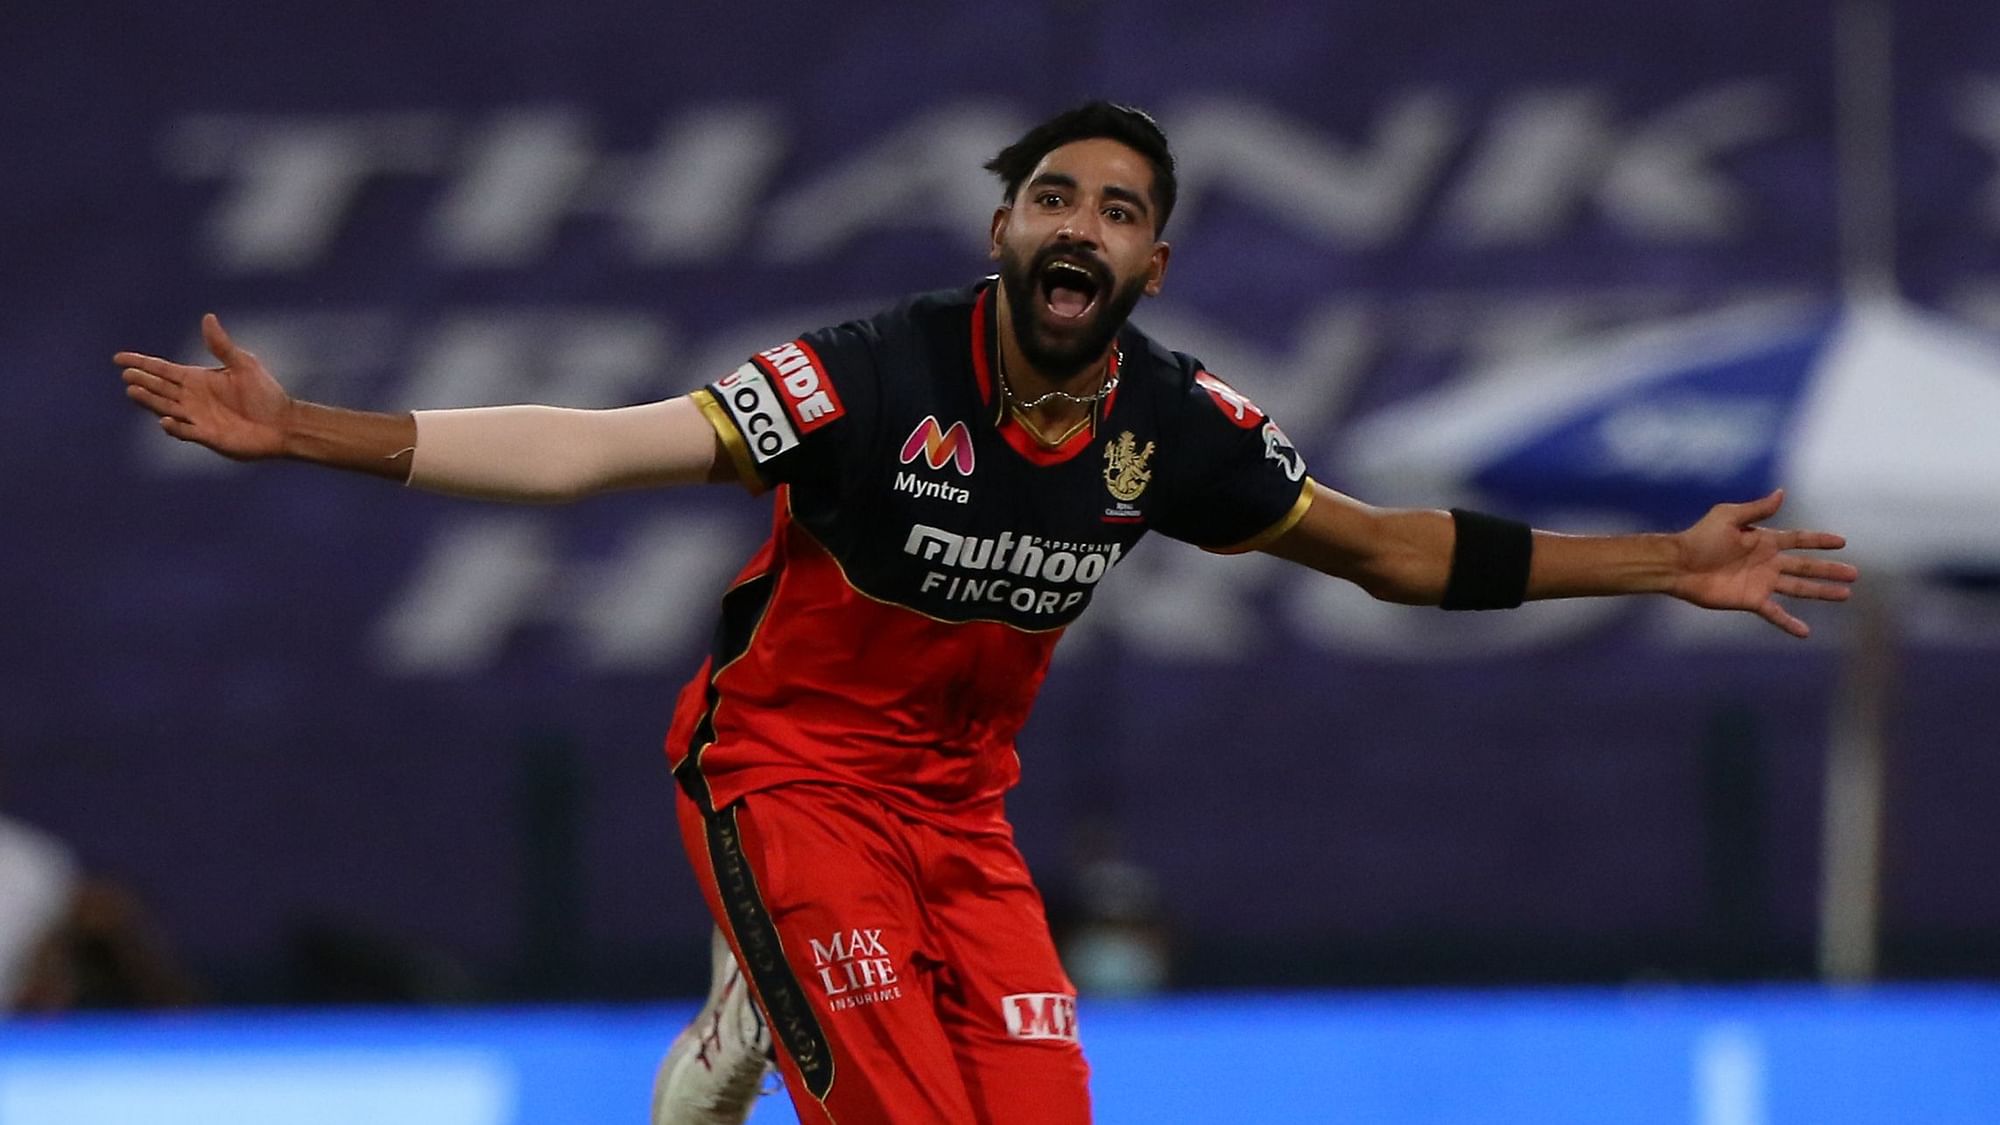 RCB’s medium-pacer Mohammed Siraj became the first player in IPL history to bowl two maidens in IPL history.